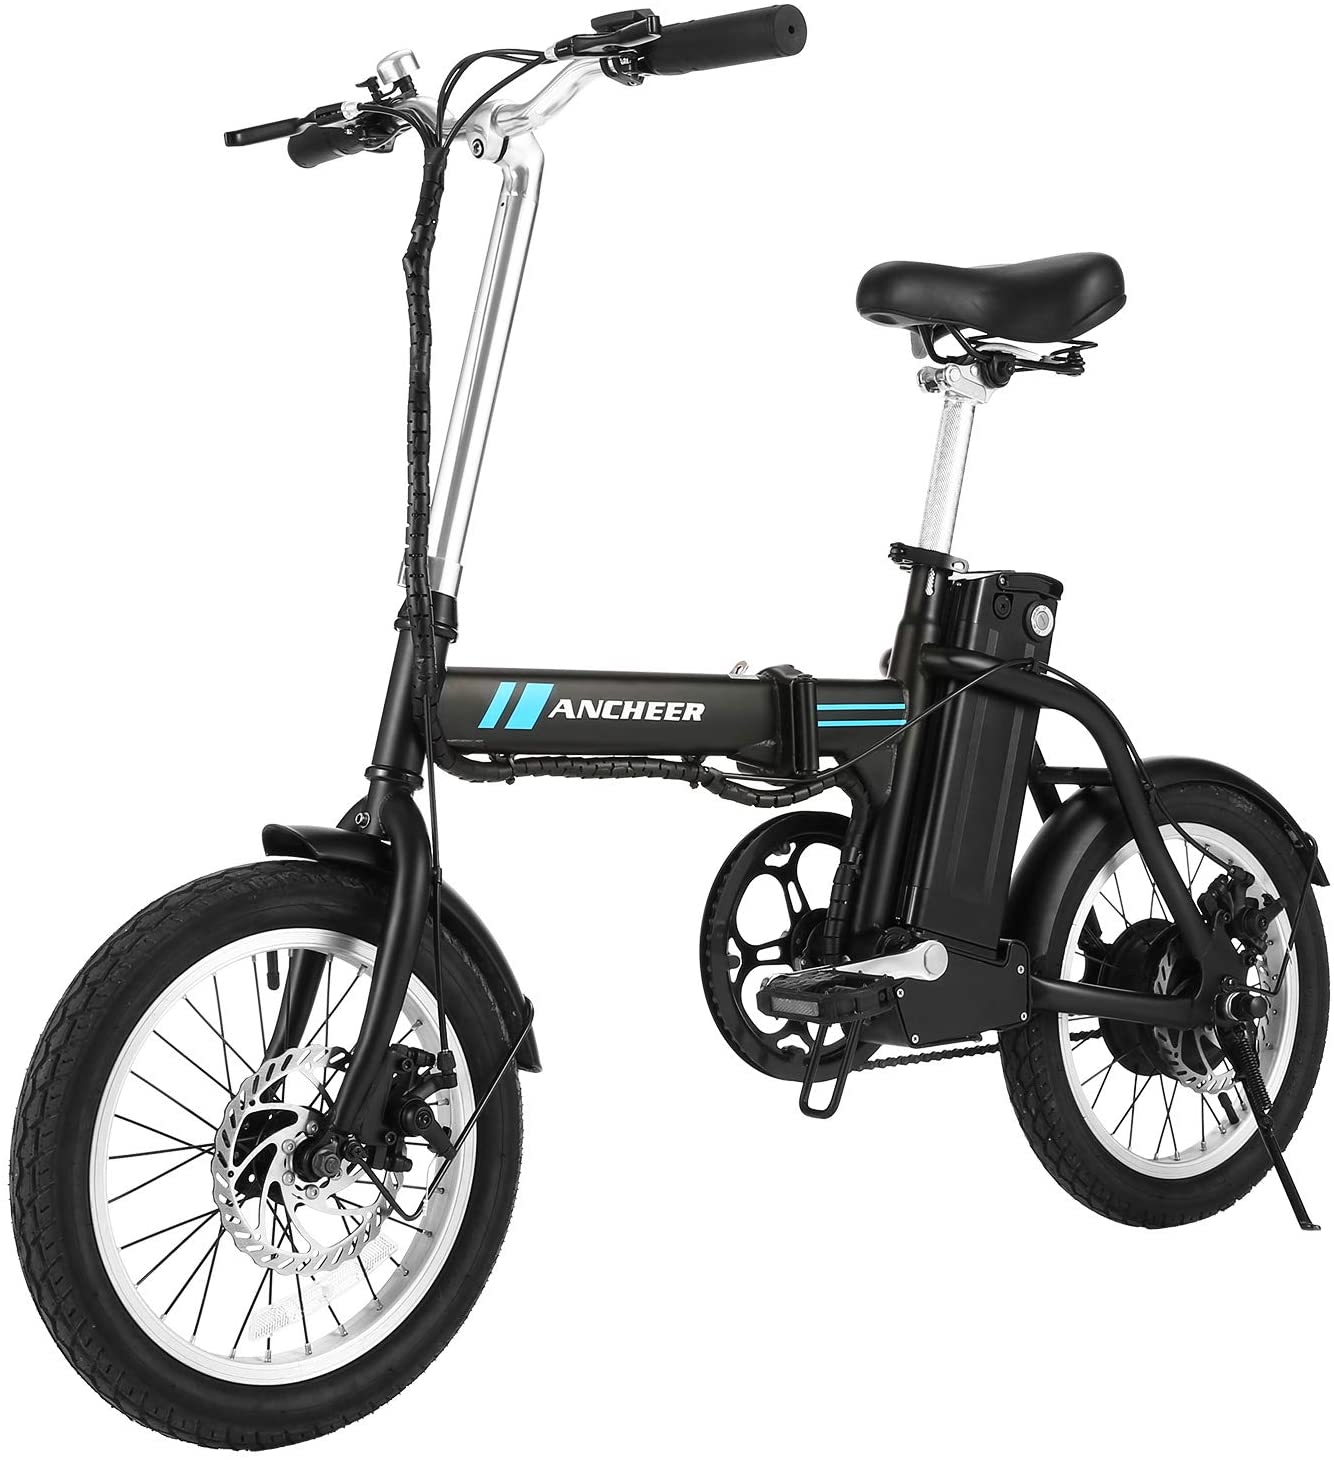 ANCHEER Removable Lithium-Ion Battery Electric Commuter Bike, 3-Speed